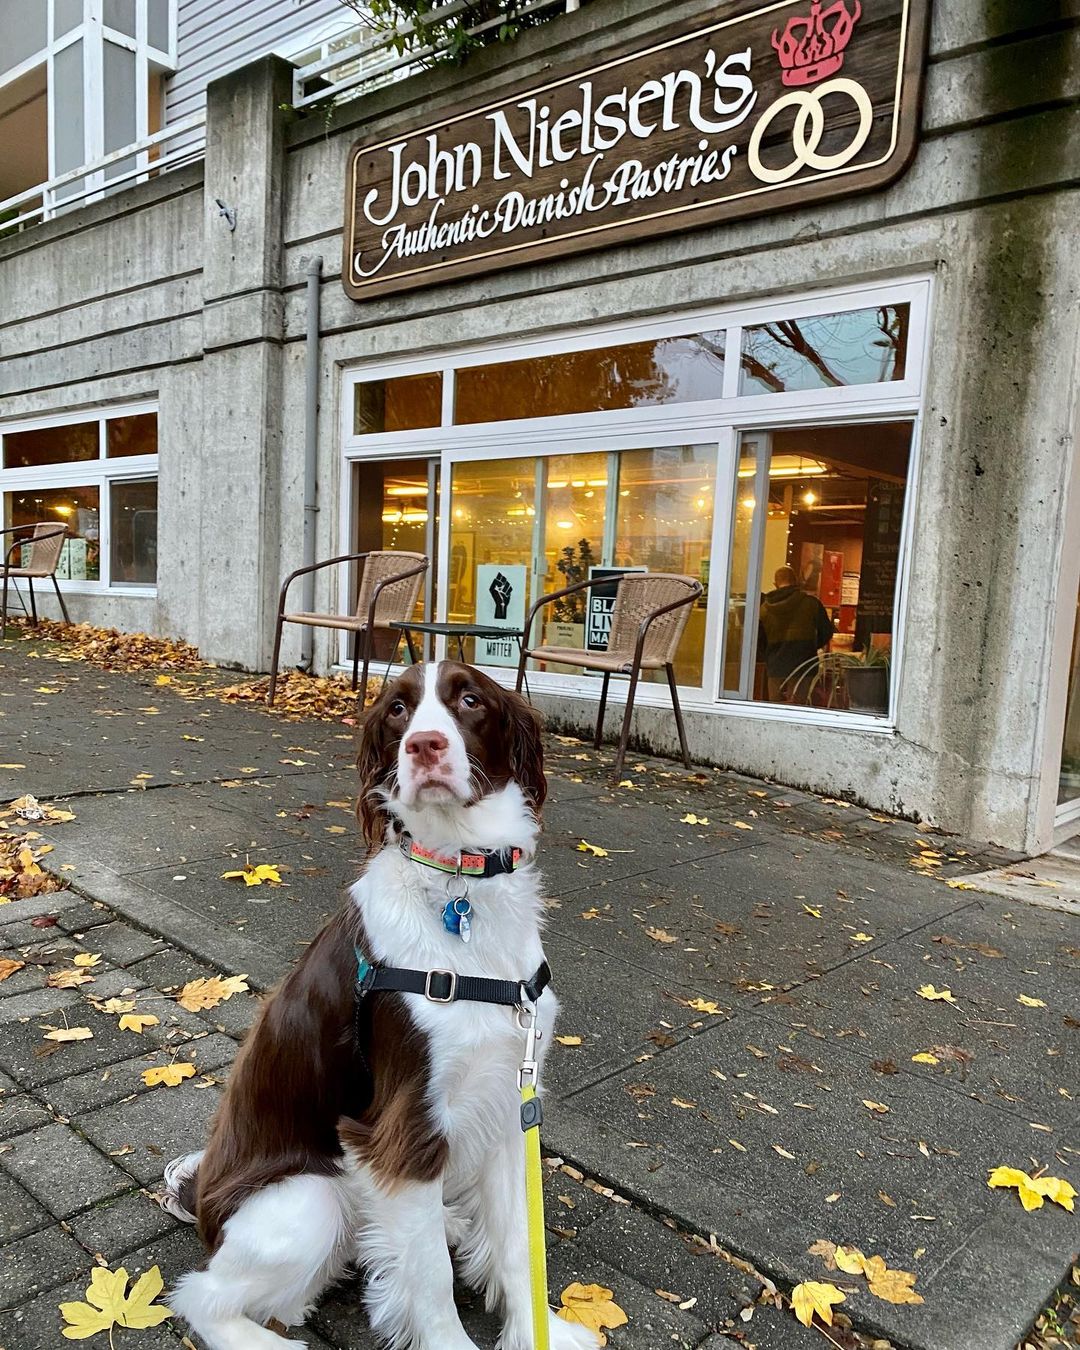 Photo shared by Mocha on November 05, 2021 tagging @nielsenspastries, and @meet_mocha. Dog friendly restaurants Seattle